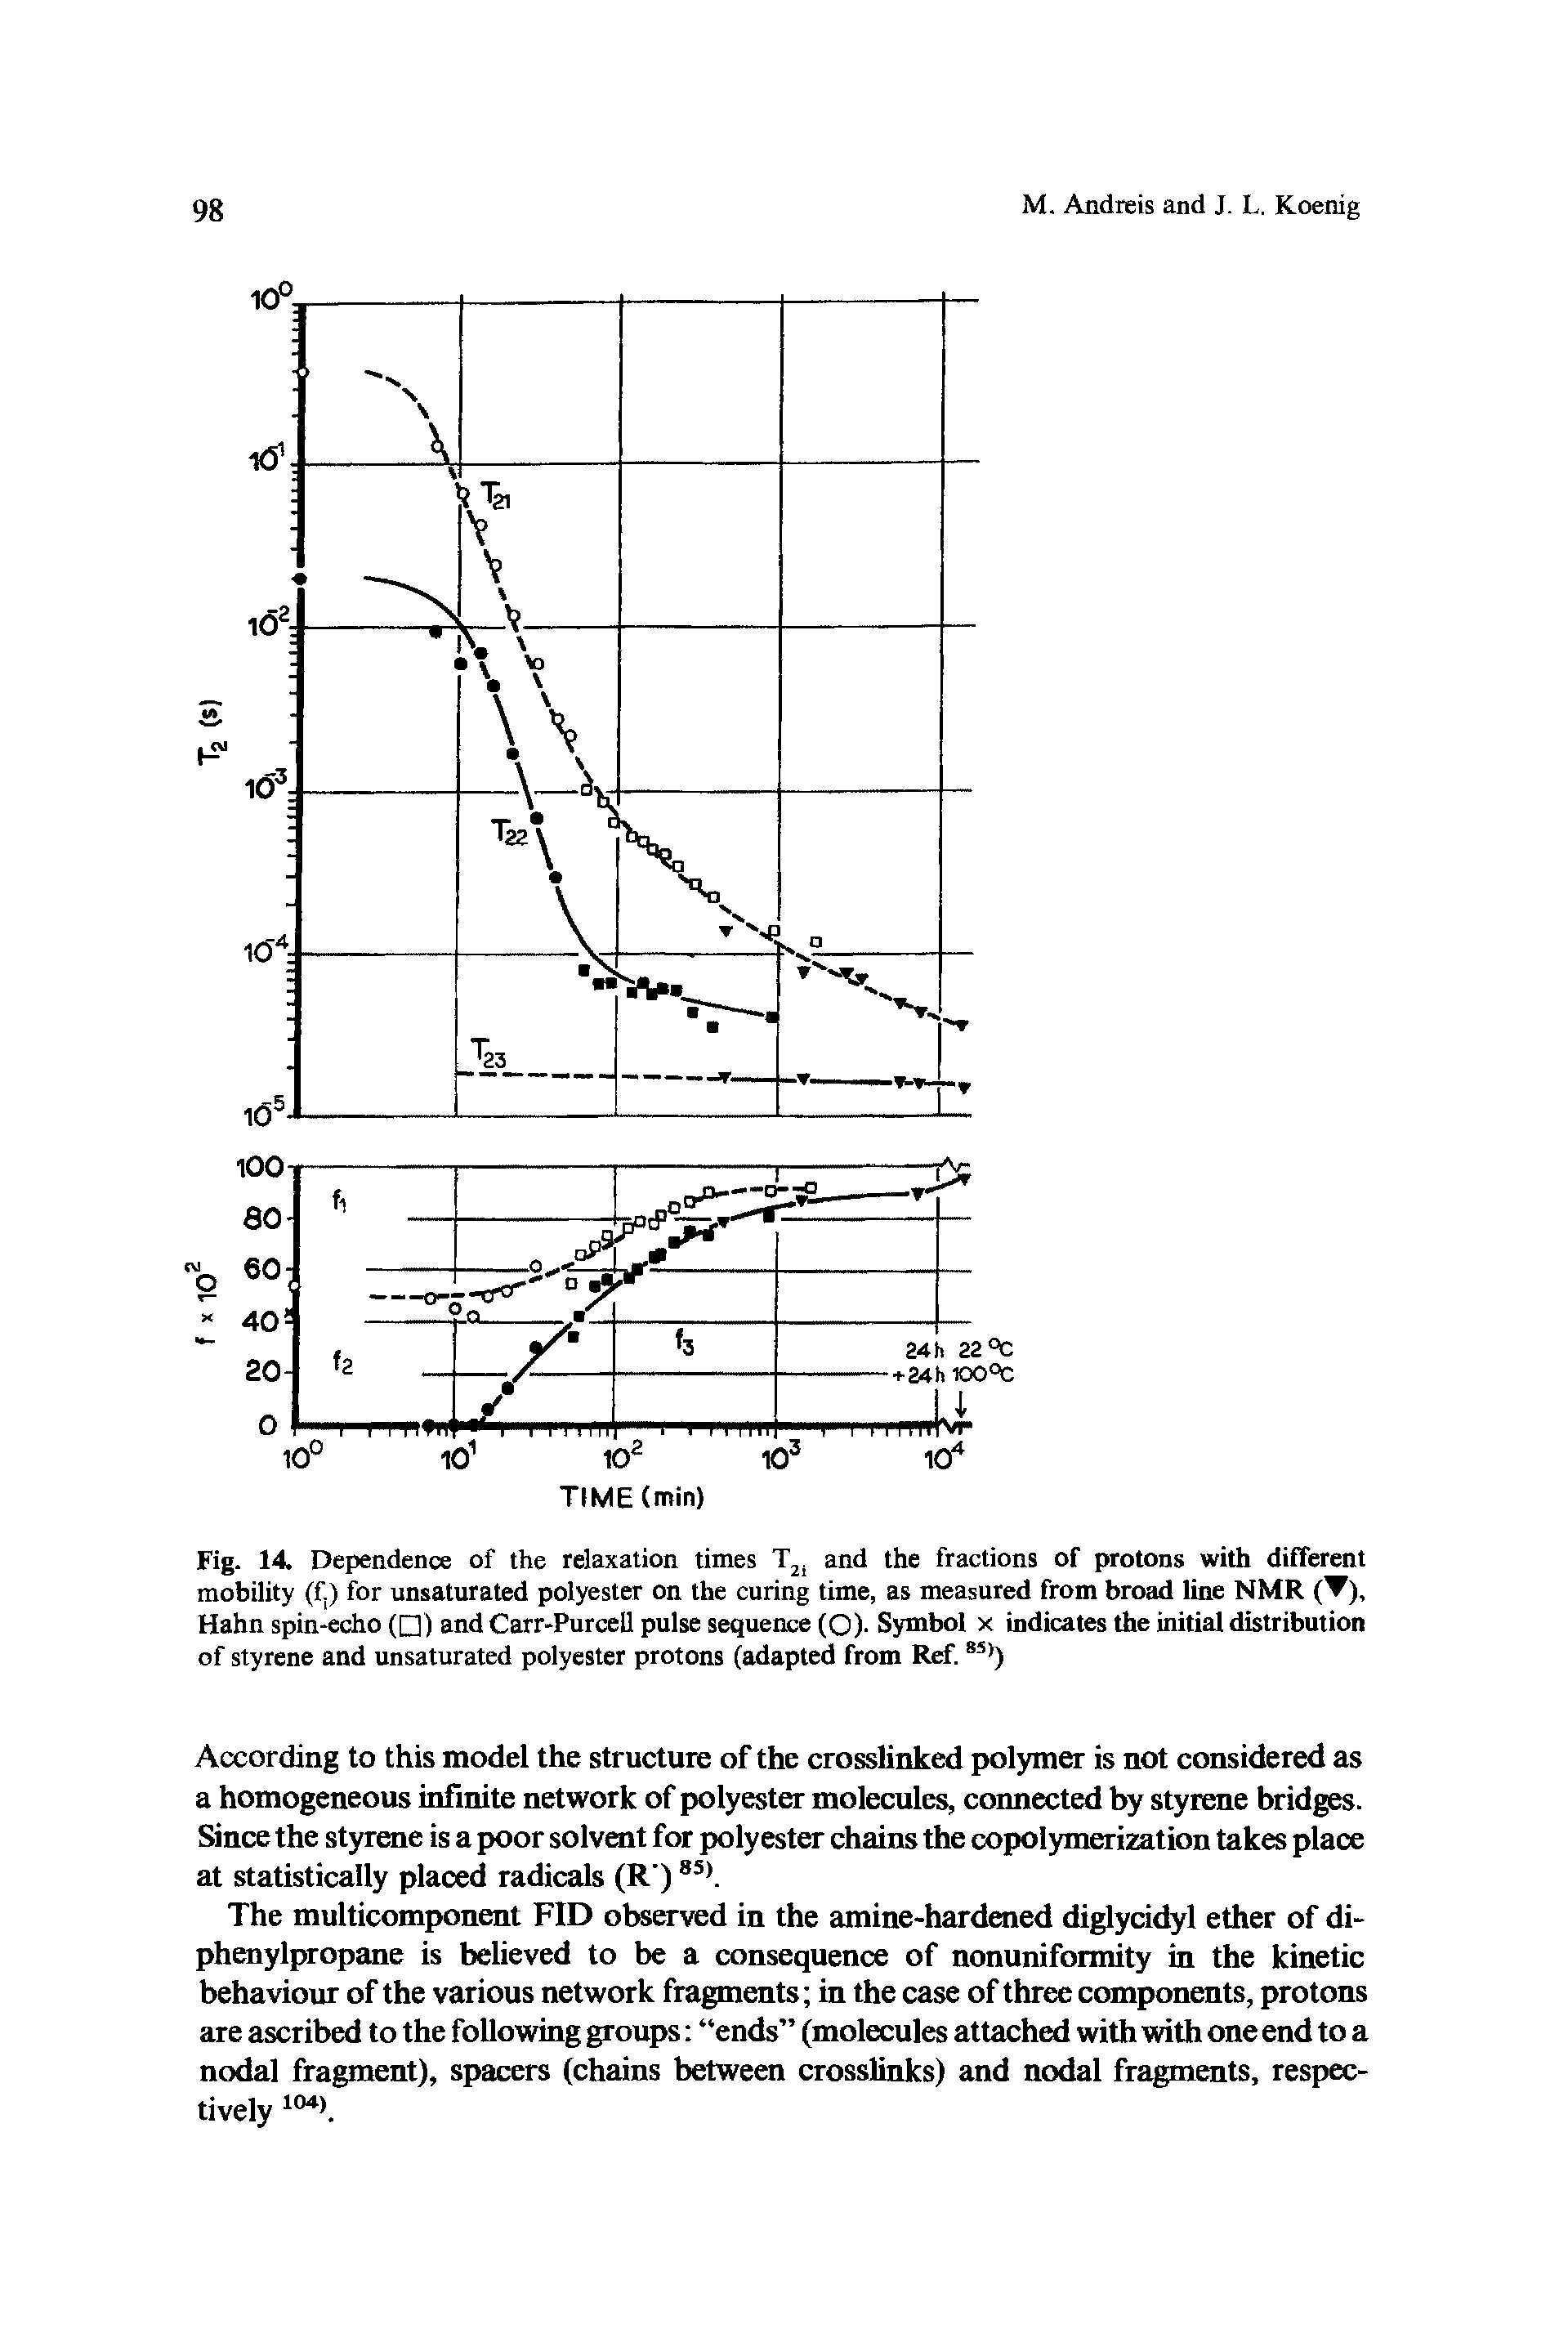 Fig. 14. Dependence of the relaxation times T2. and the fractions of protons with different mobility (f.) for unsaturated polyester on the curing time, as measured from broad line NMR ( ), Hahn spin-echo ( ) and Carr-Purcell pulse sequence (O)- Symbol x indicates the initial distribution of styrene and unsaturated polyester protons (adapted from Ref. S5))...